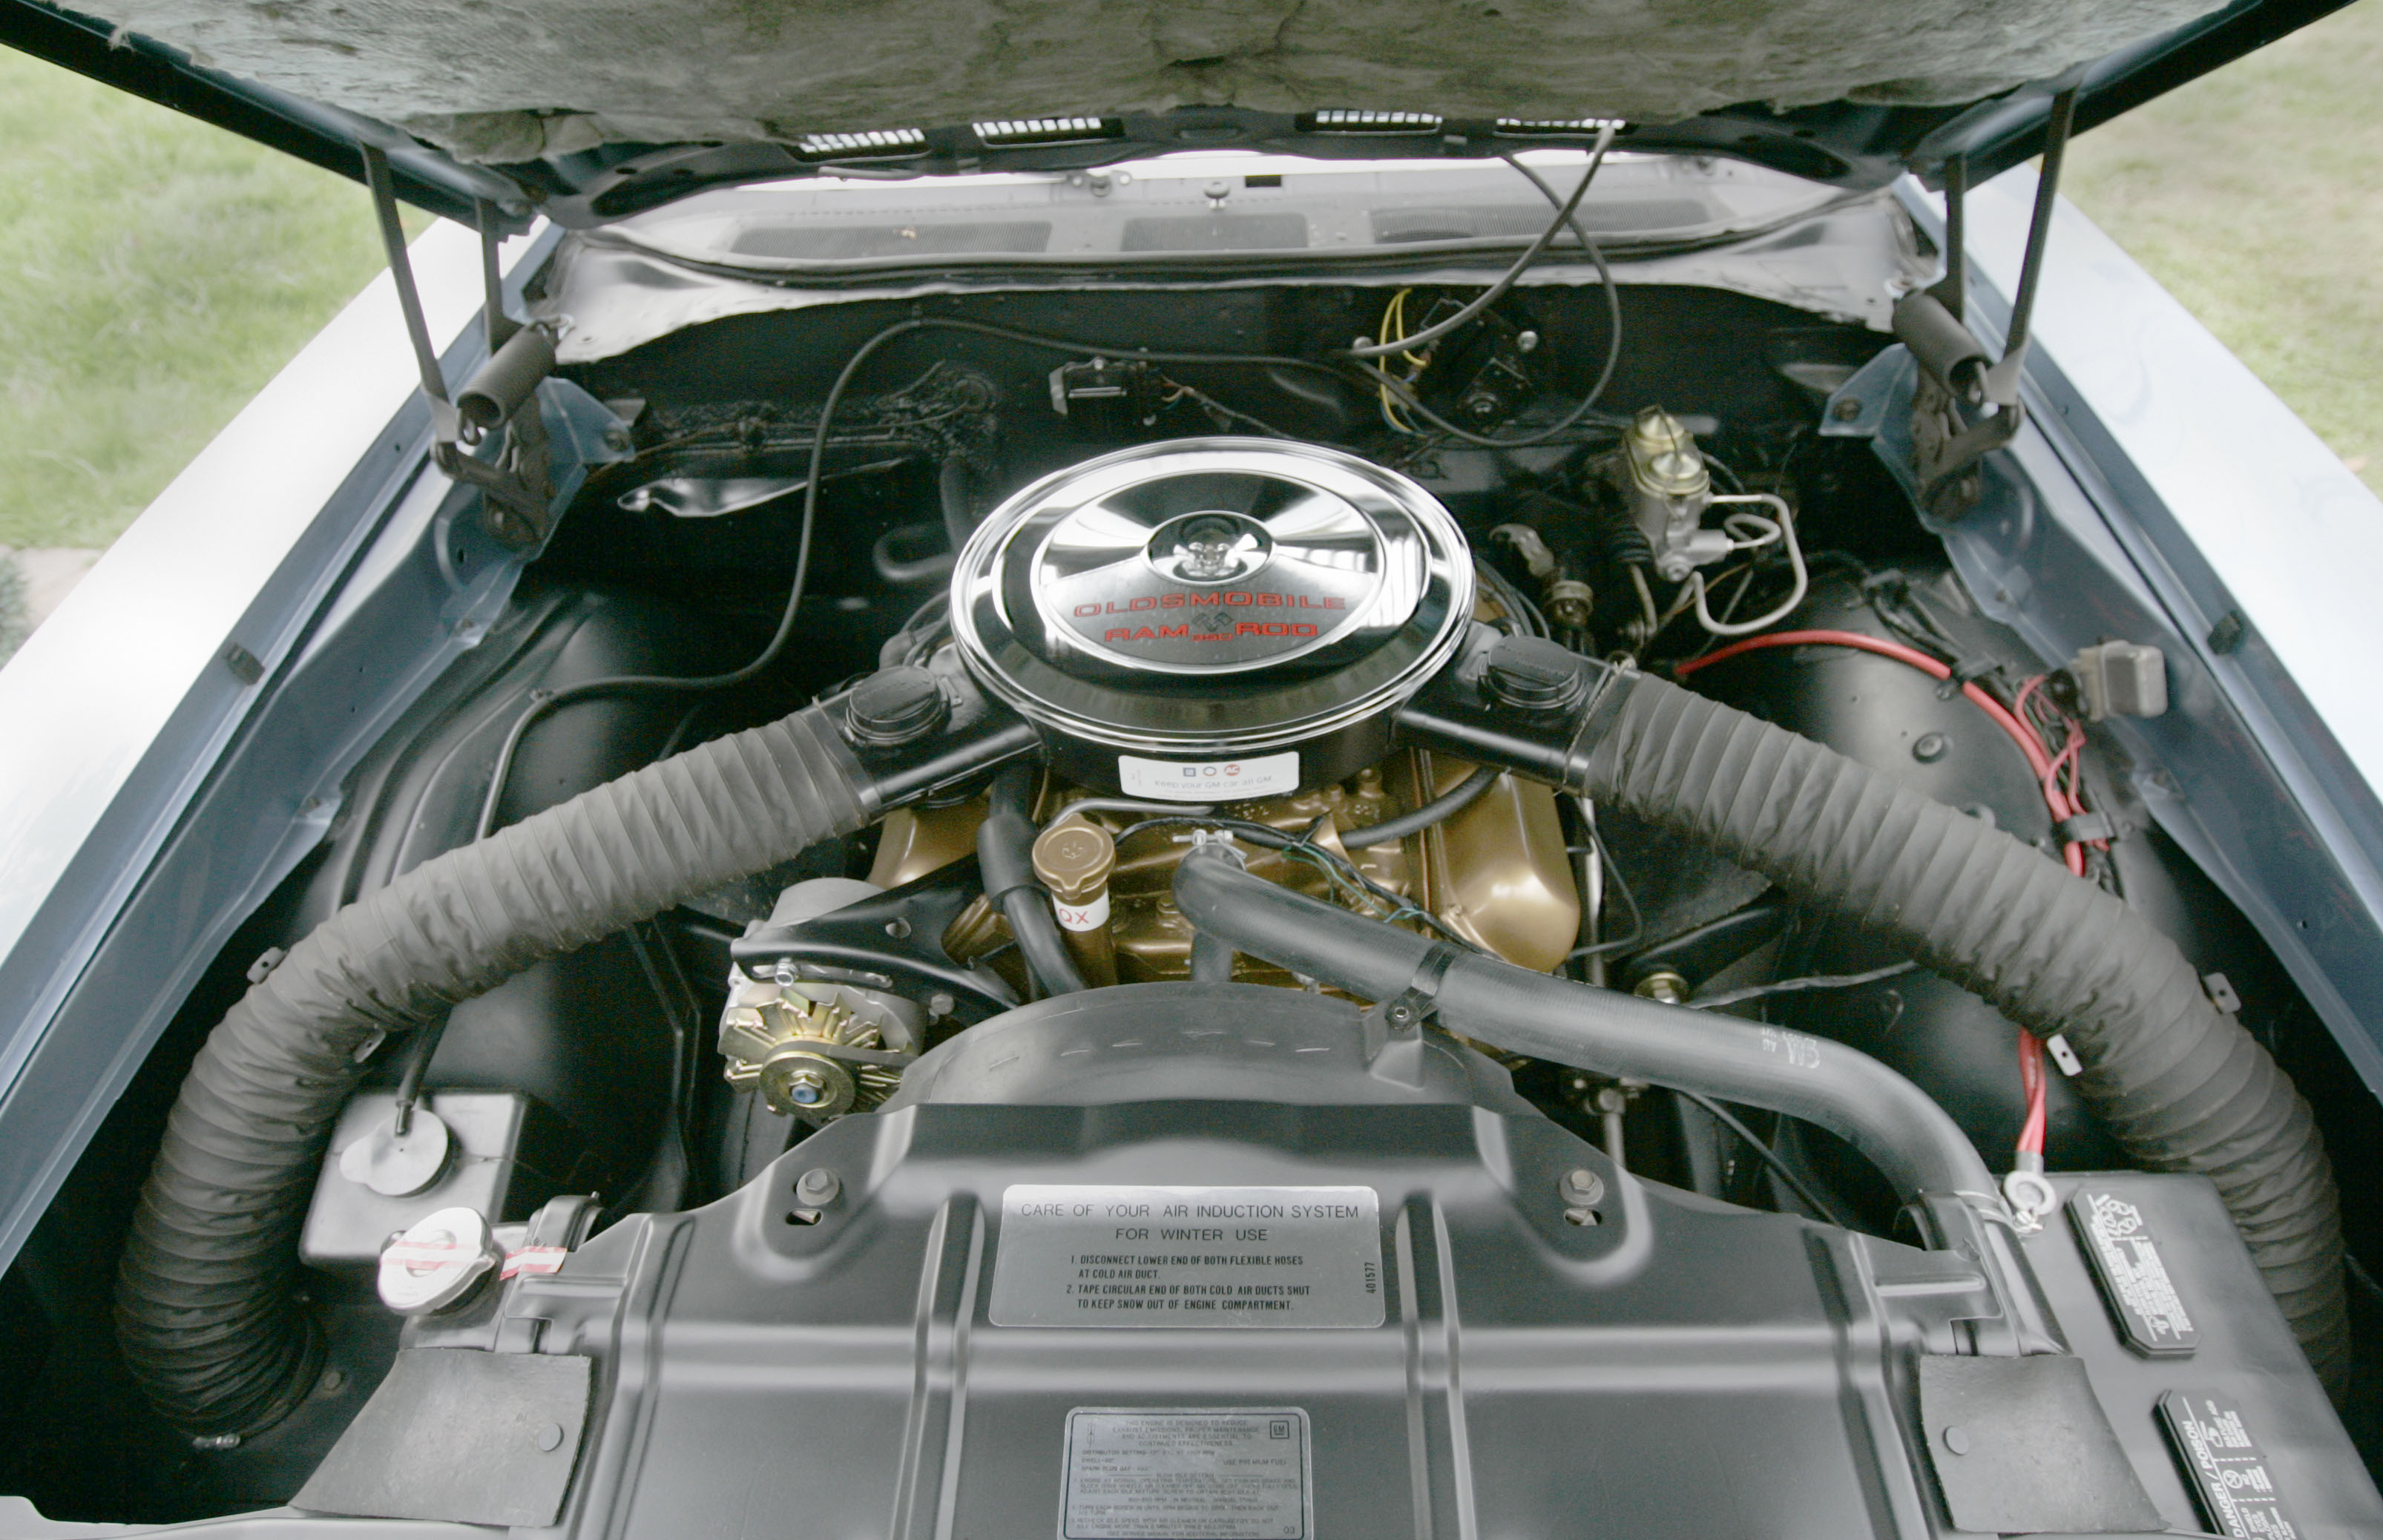 American drivers turn to smaller, better engines